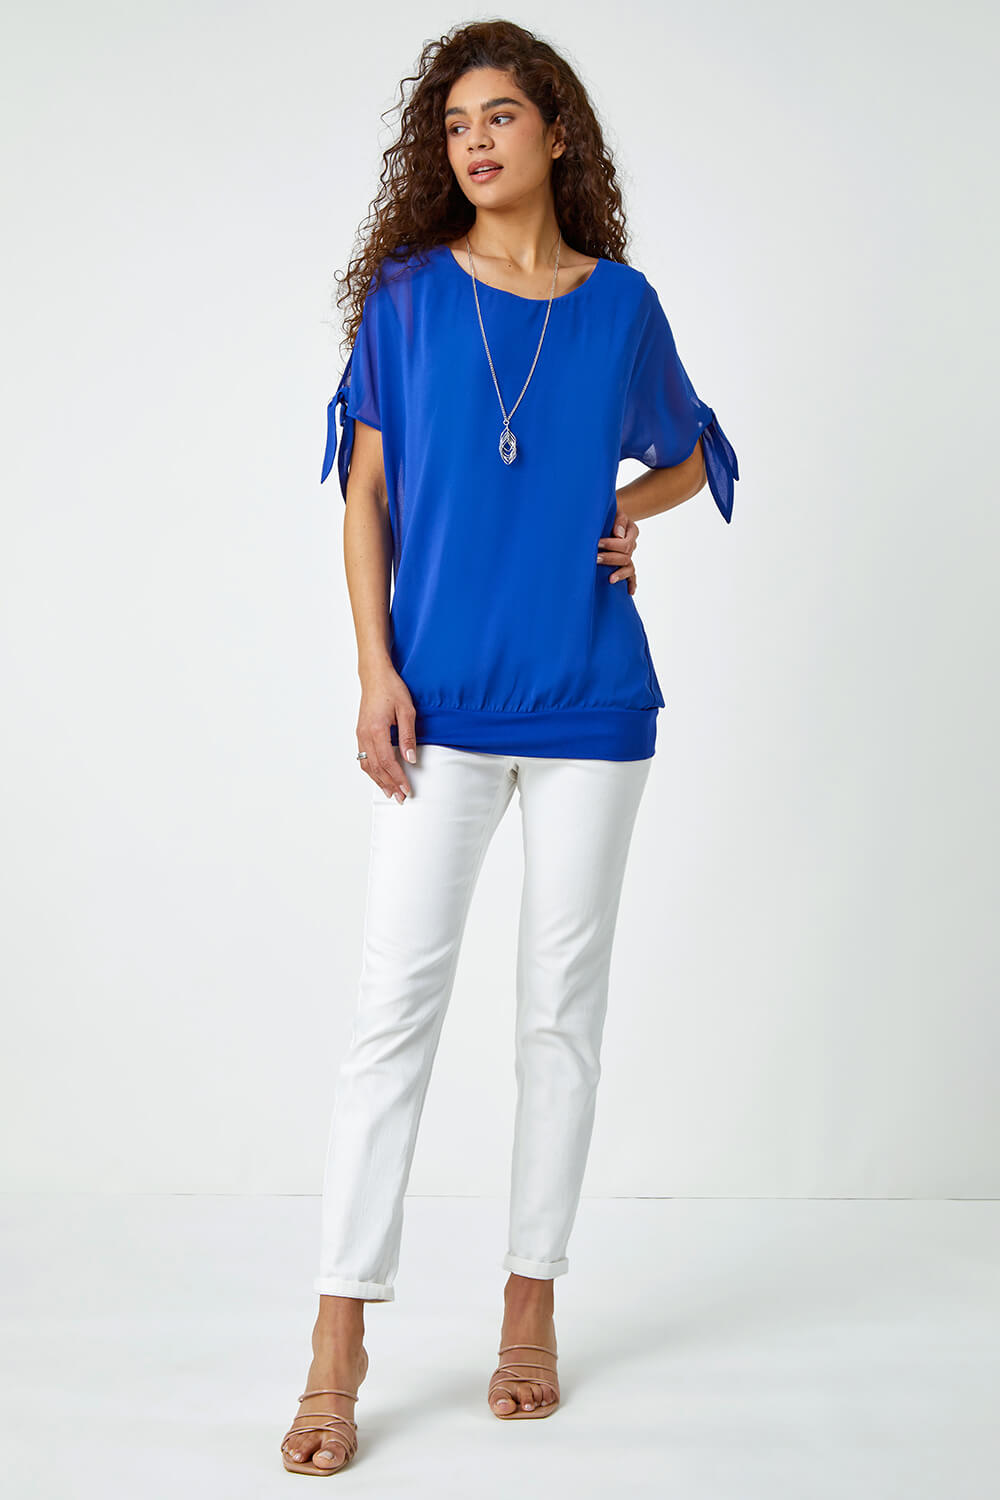 Royal Blue Chiffon Layered Tie Detail Top with Necklace, Image 4 of 5